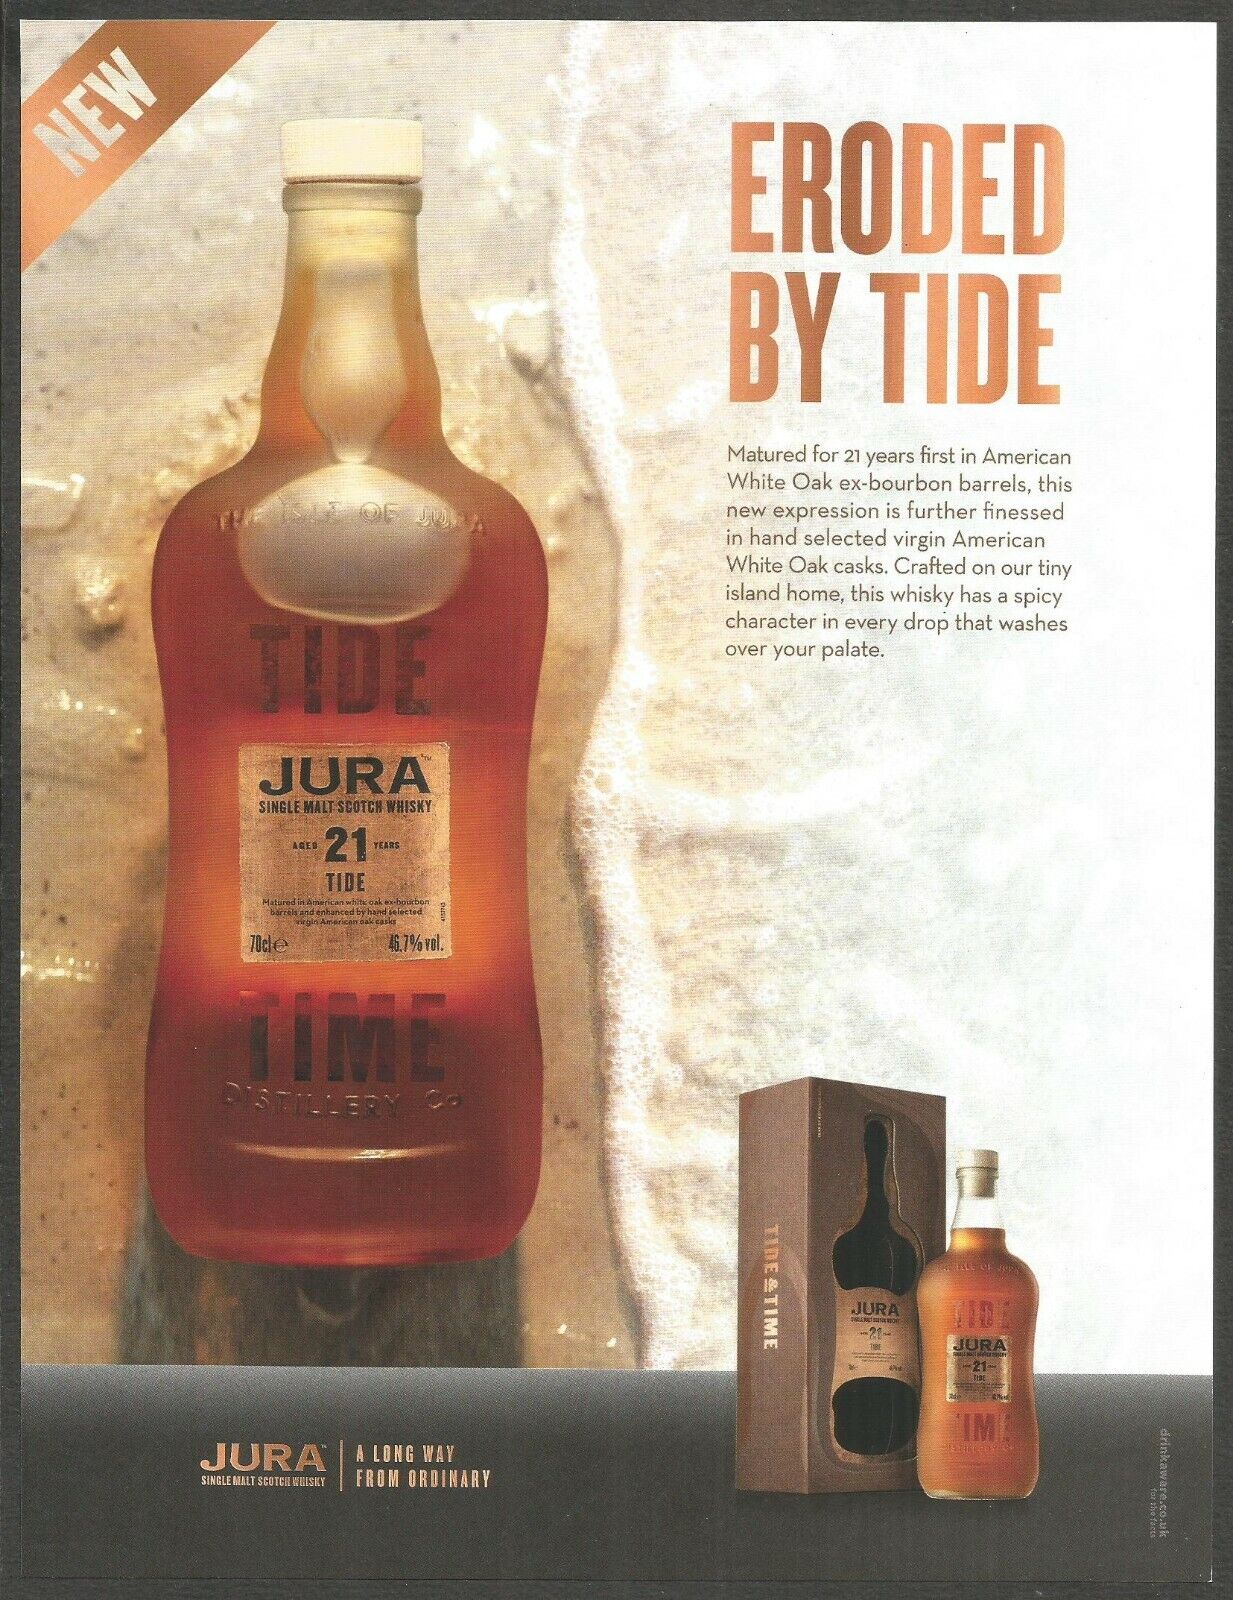 JURA Single Malt Scotch Whisky . Aged 21 Years - Eroded by Tide - 2019 Print Ad